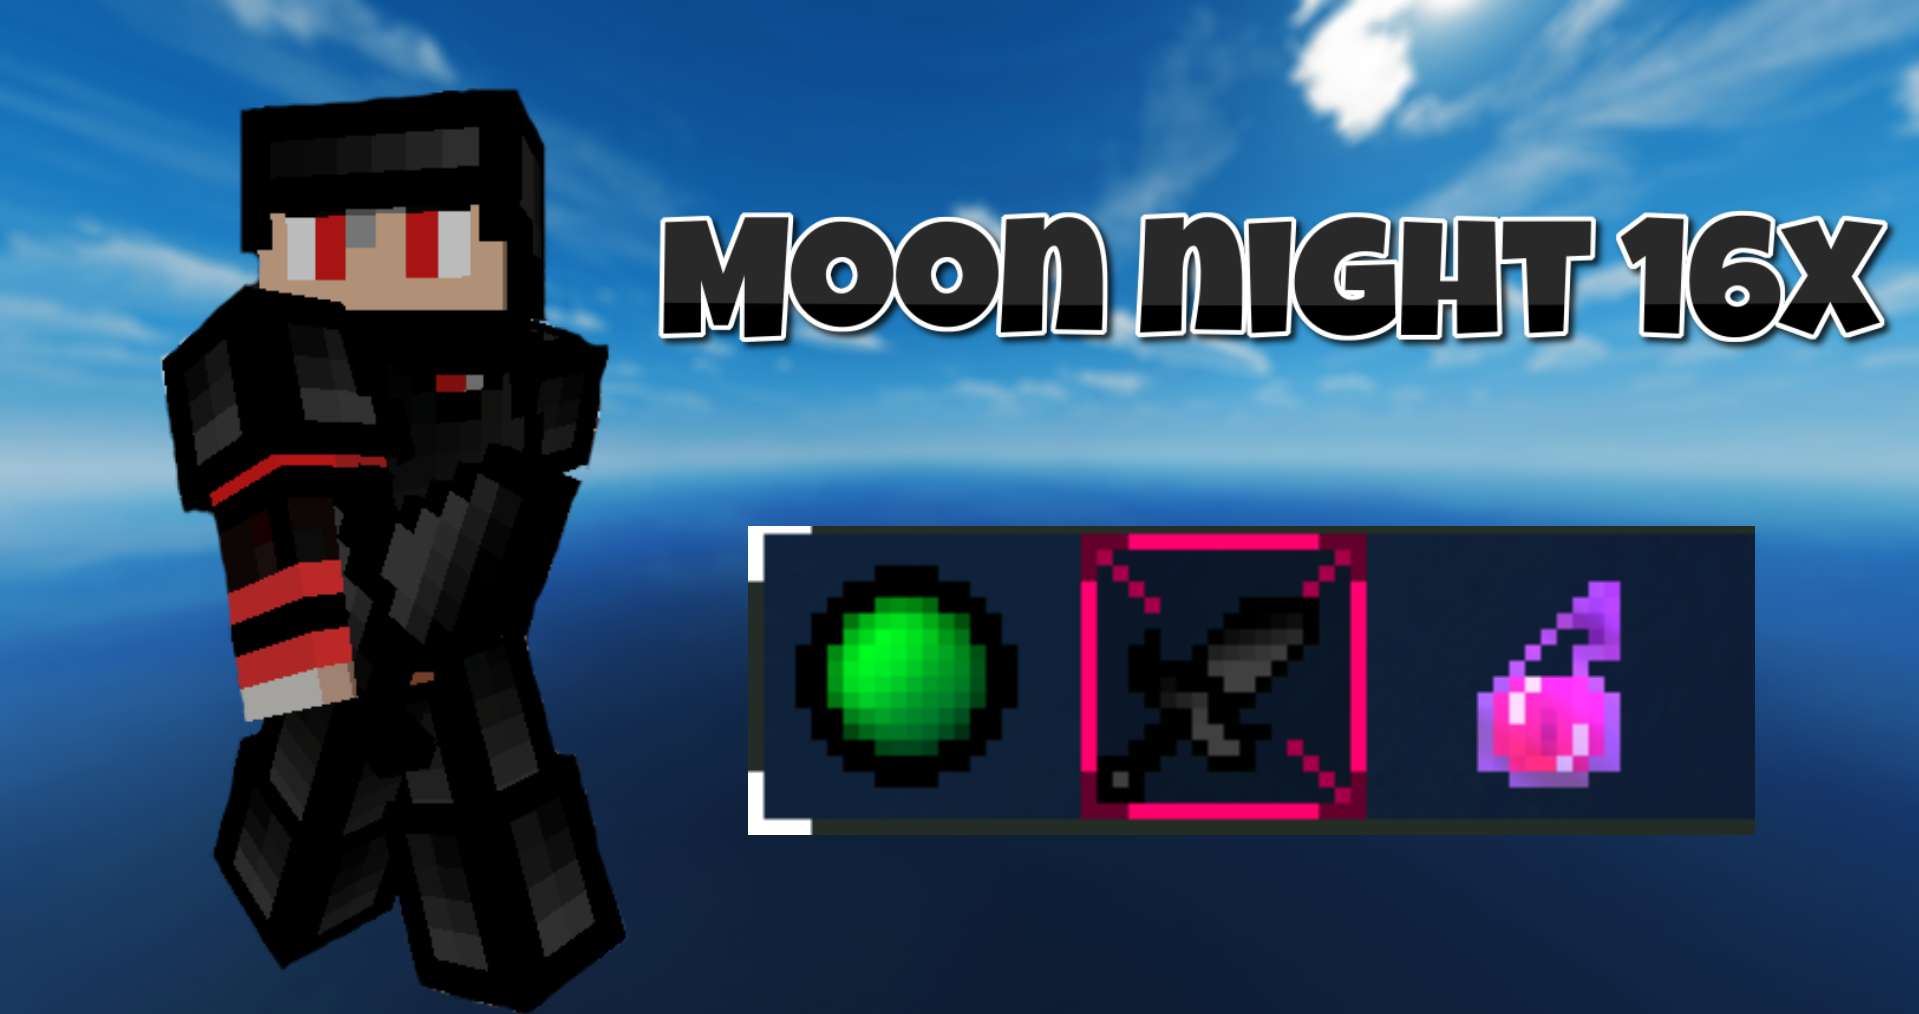 Moon night 16 by 9gamesiscool on PvPRP